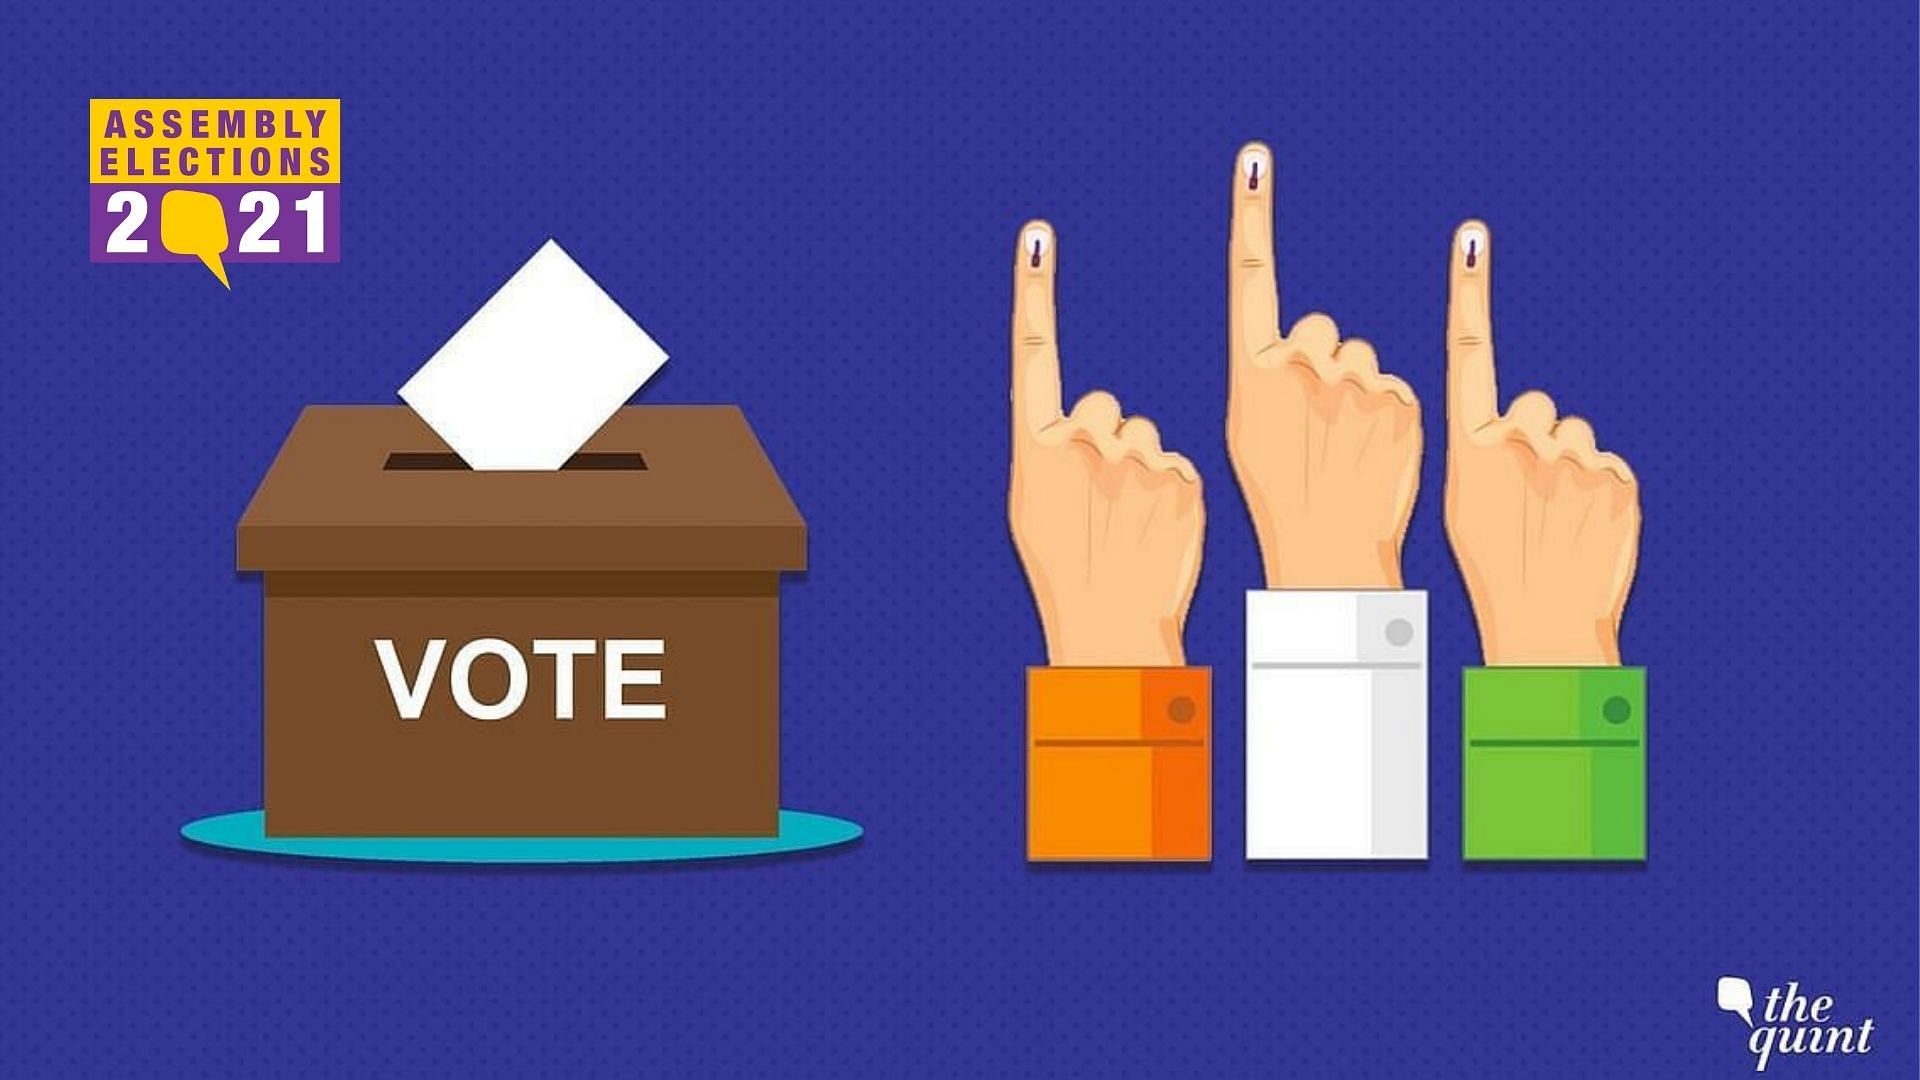 The second phase of polling for the West Bngal and the Assam Assembly elections ended on Thursday, 1 April with a voter turnout of 80.53 and 73.03 respectively.